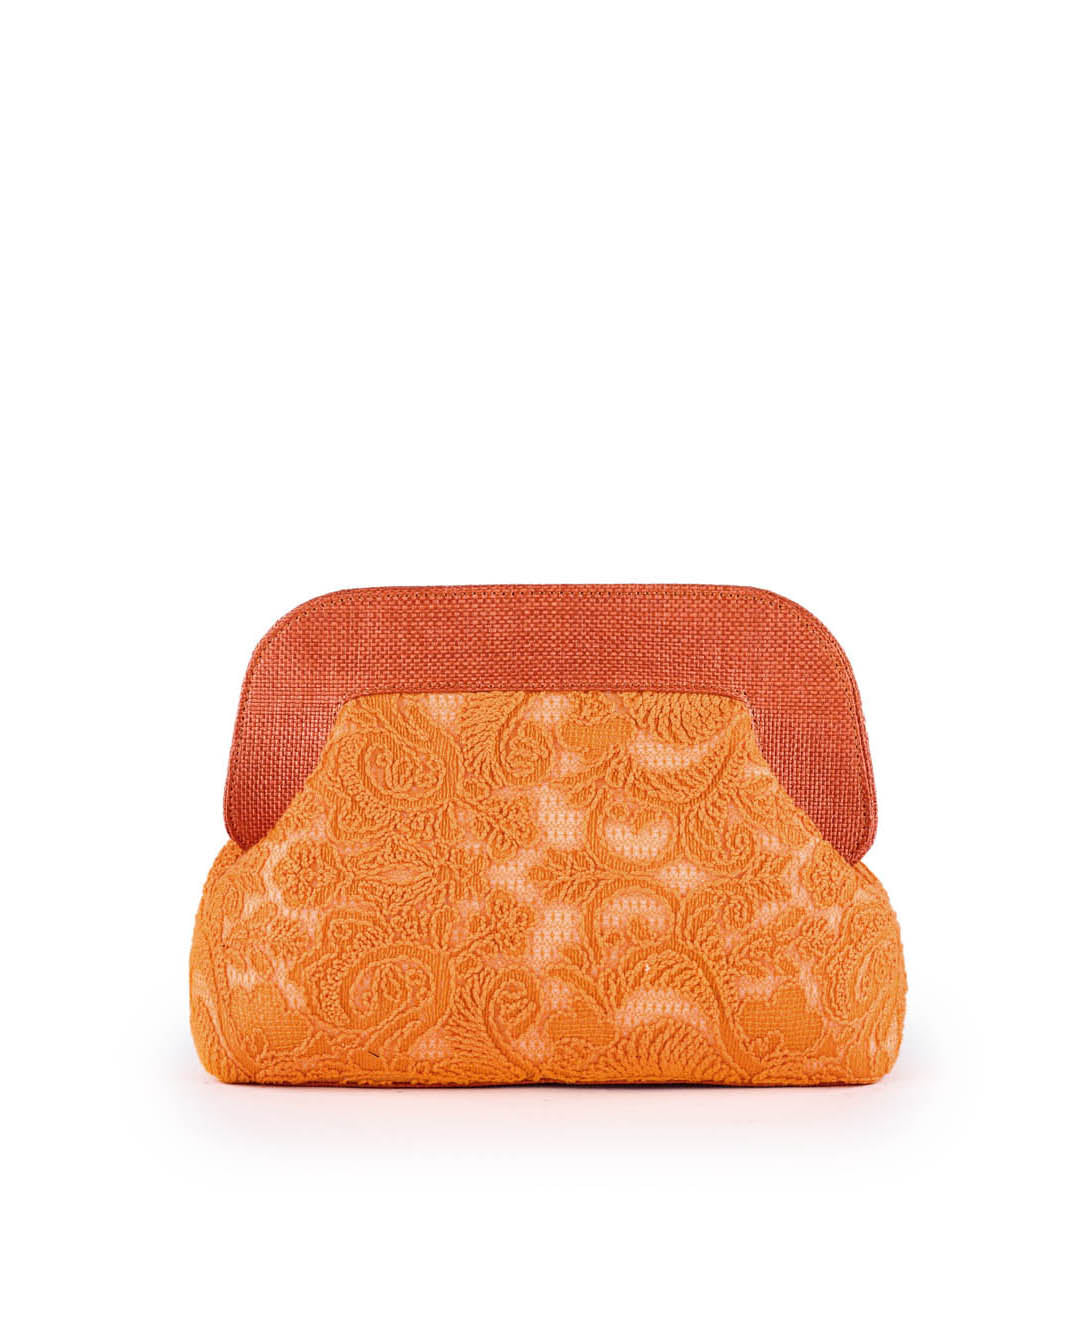 Orange lace clutch bag with intricate paisley design and textured fabric flap